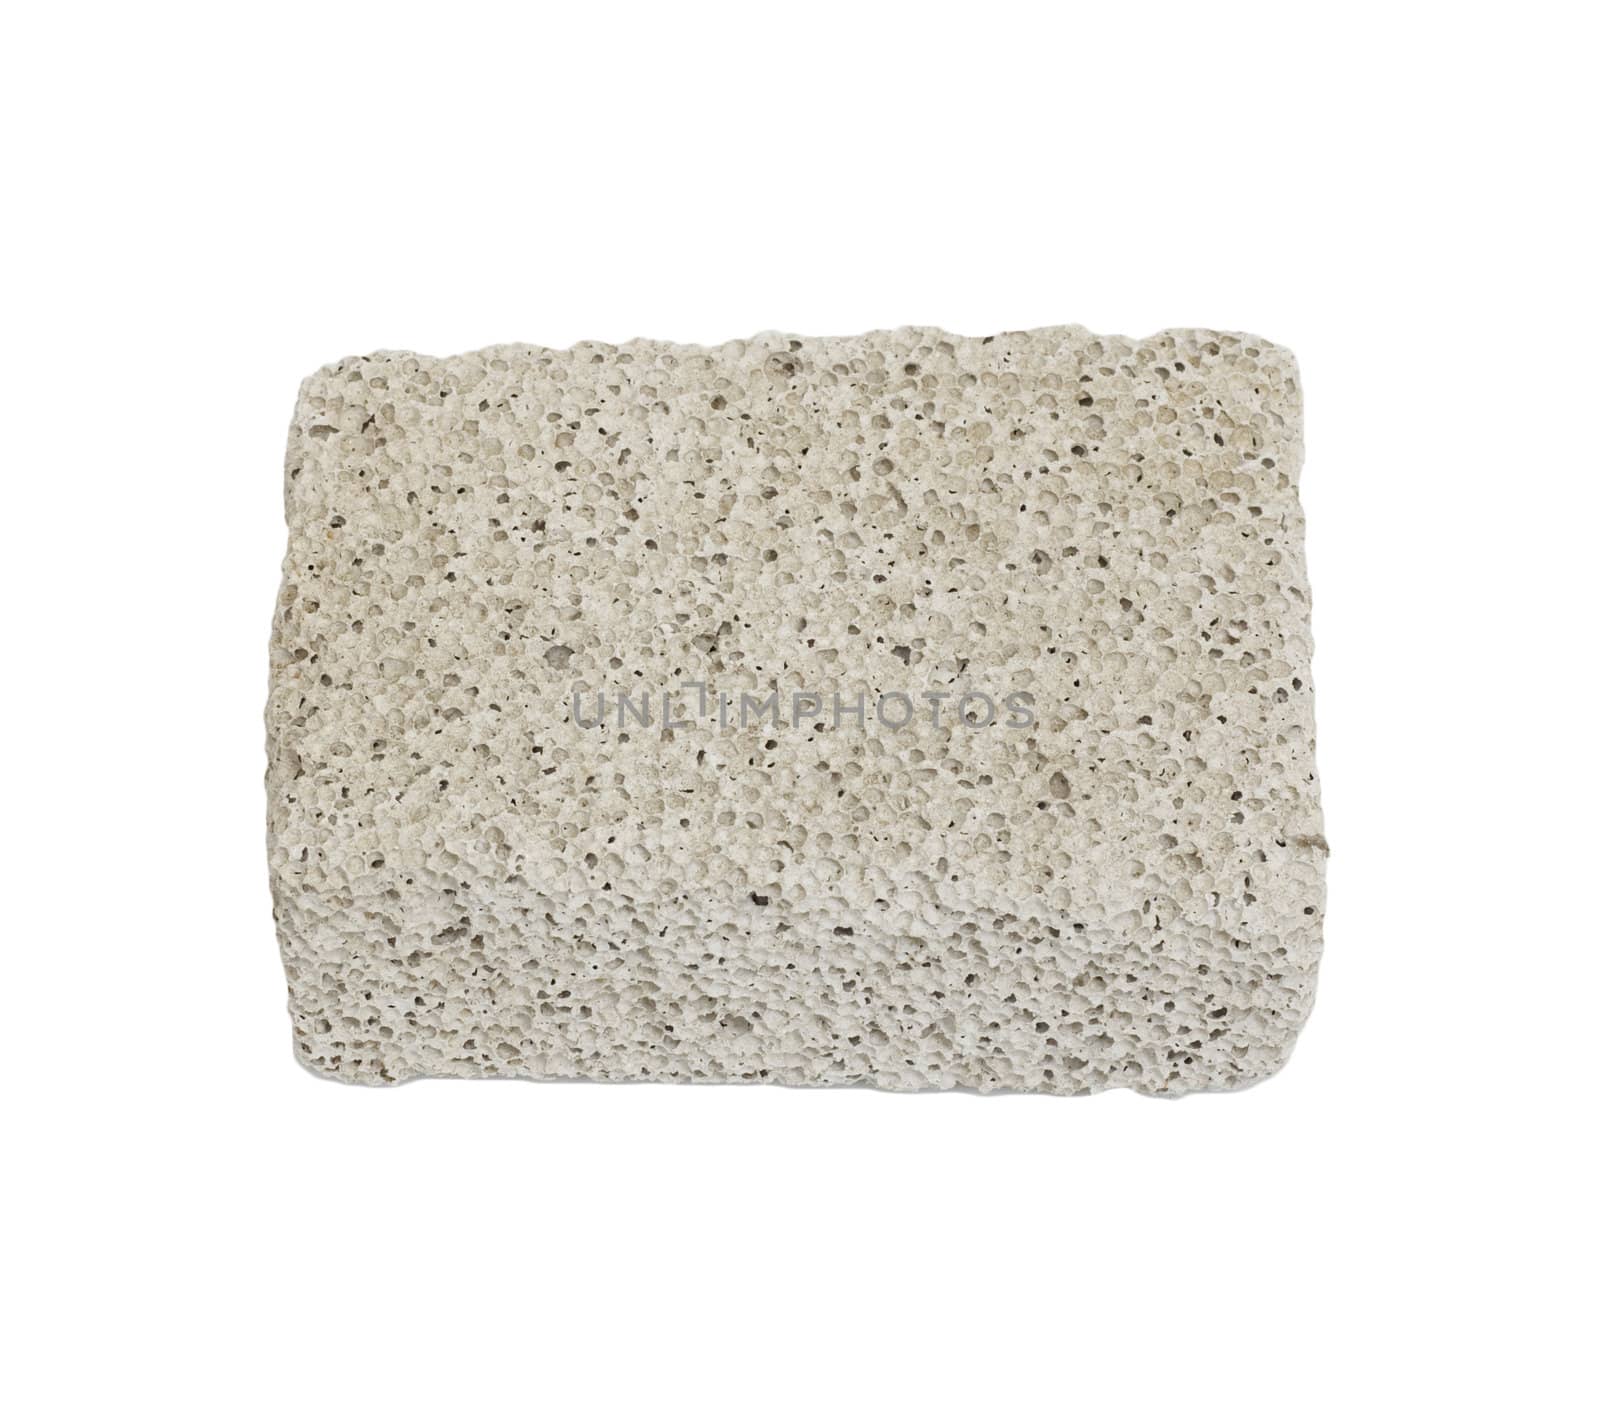 Pumice Stone Detail Isolated on White Background 